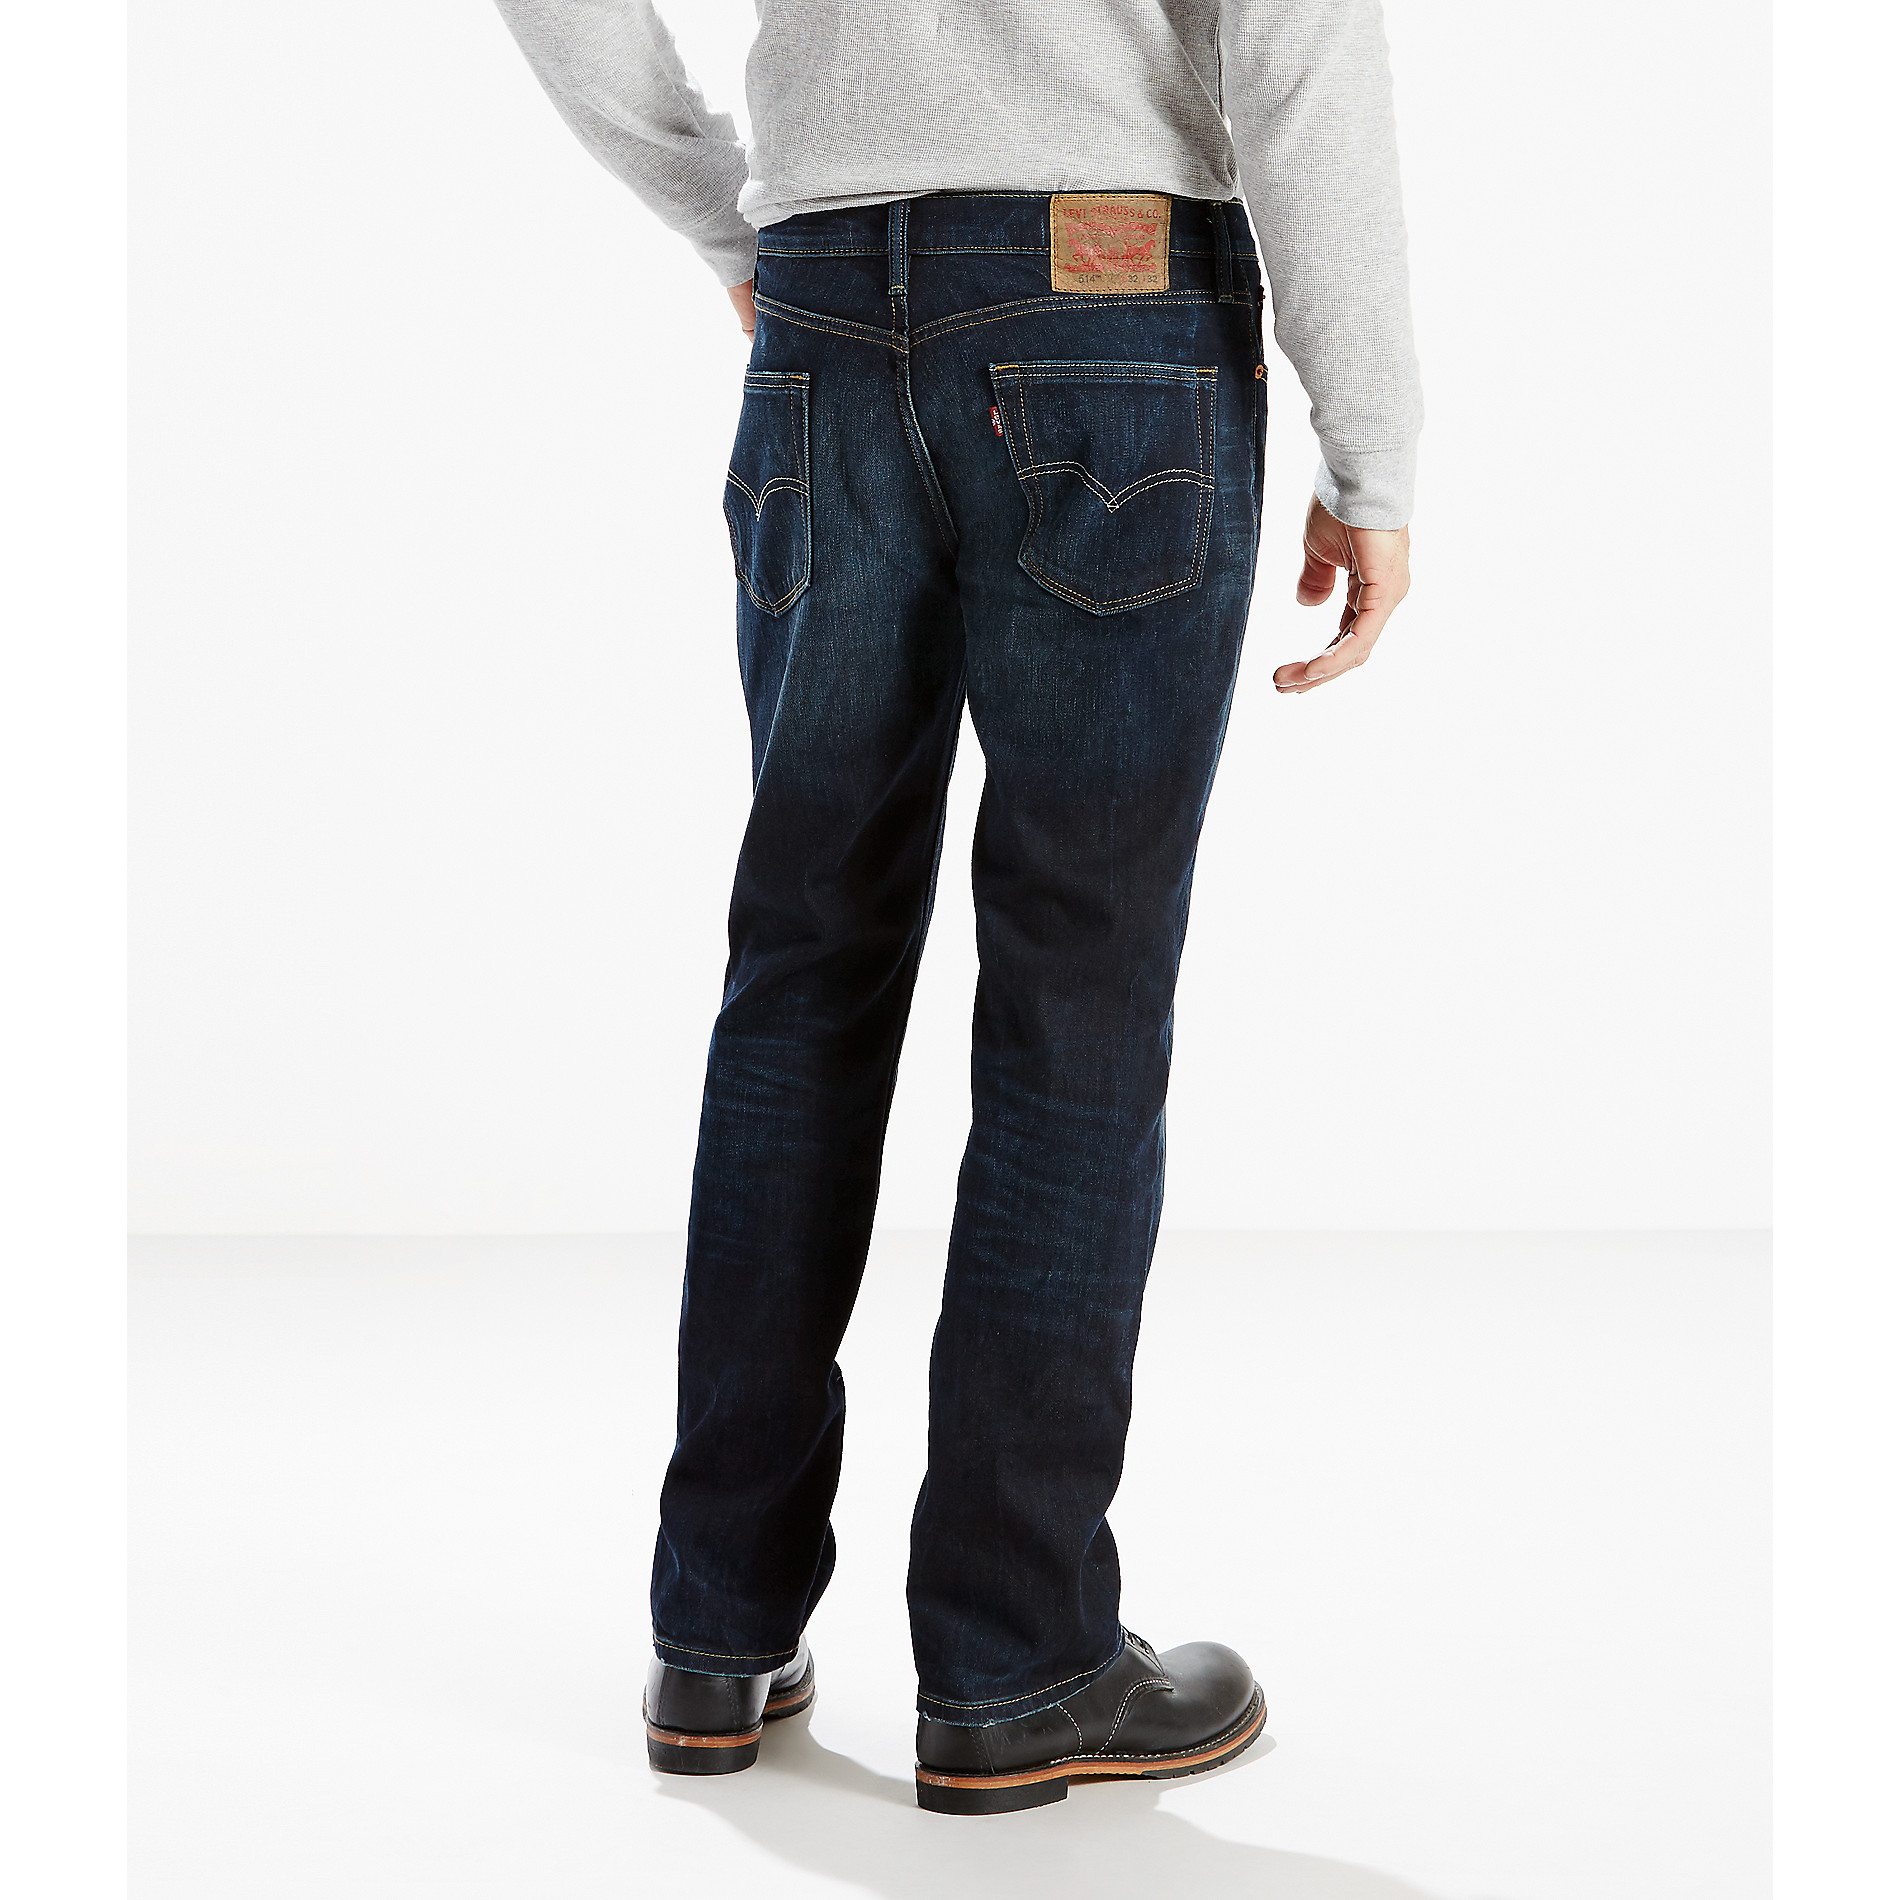 Sears Levis 514 Cheaper Than Retail Price Buy Clothing Accessories And Lifestyle Products For Women Men